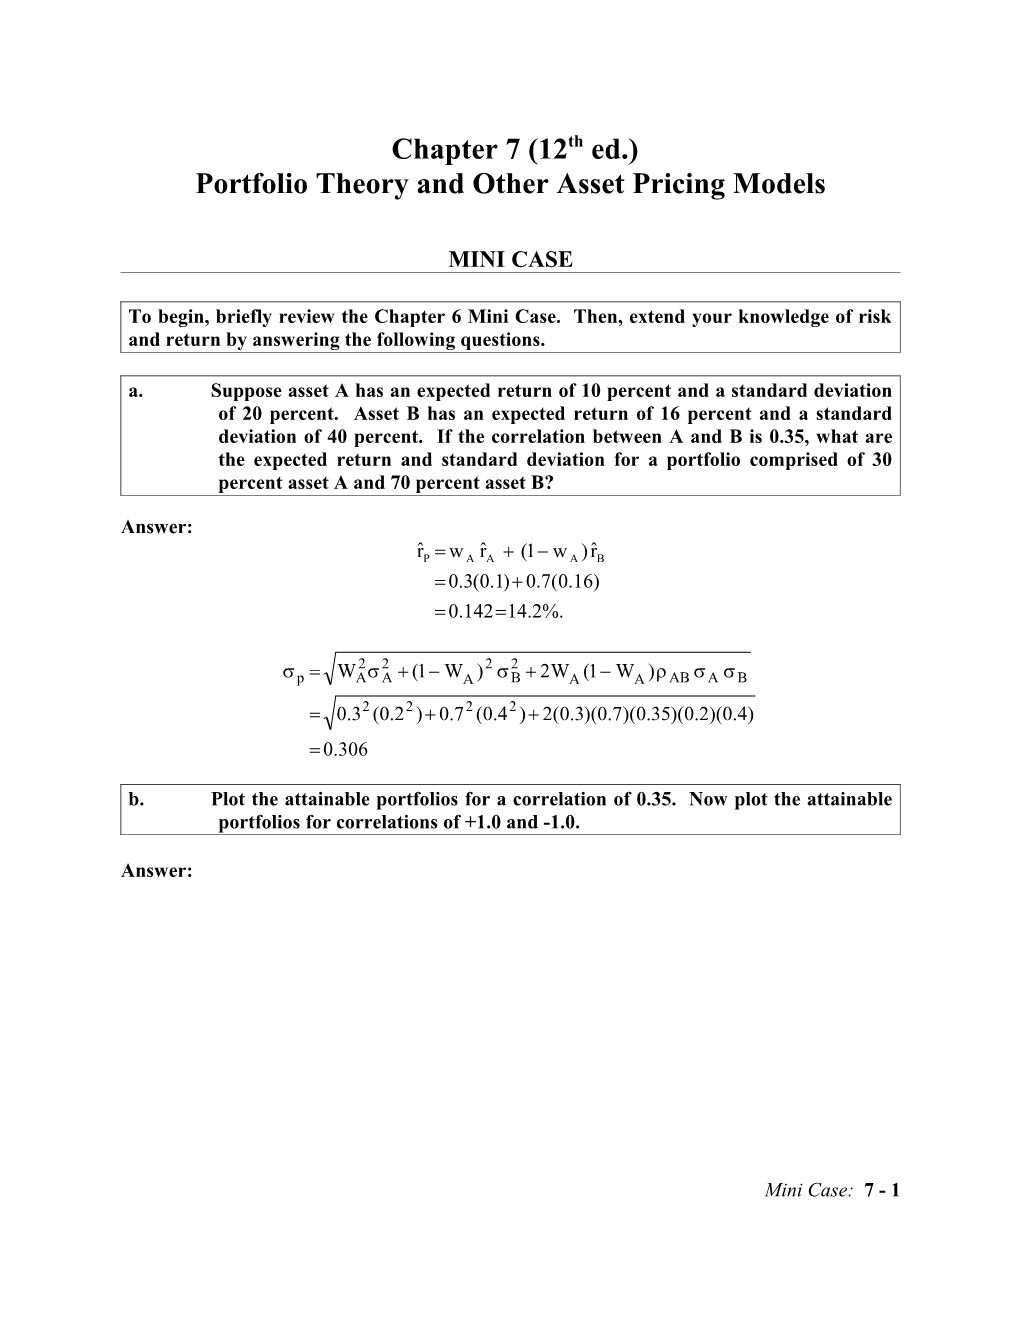 Portfolio Theory and Other Asset Pricing Models